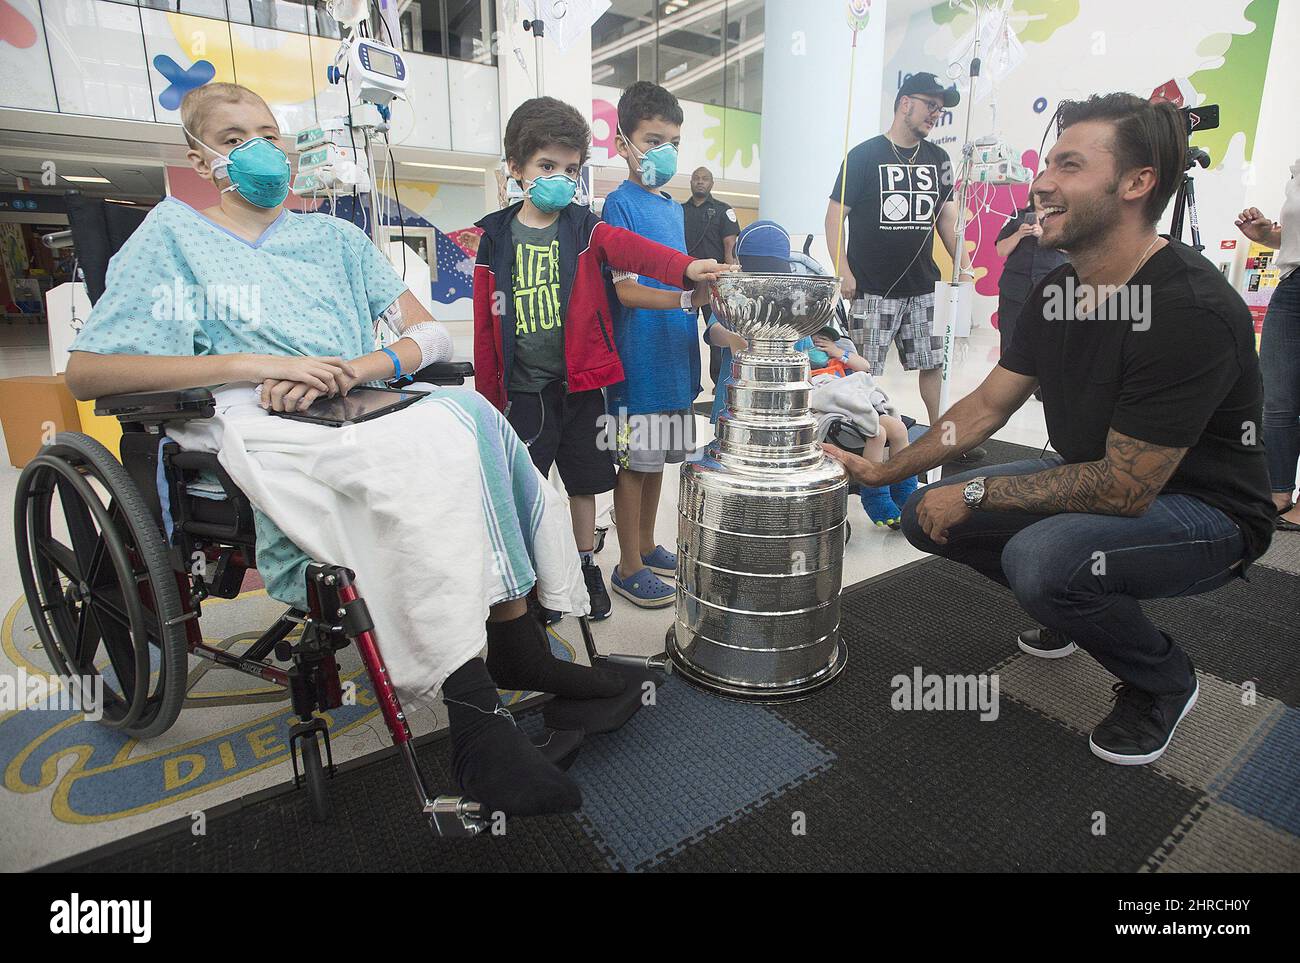 https://c8.alamy.com/comp/2HRCH0Y/pittsburgh-penguins-kris-letang-shows-off-the-stanley-cup-to-children-during-a-visit-to-sainte-justine-hospital-for-sick-children-in-montreal-sunday-july-23-2017-the-canadian-pressgraham-hughes-2HRCH0Y.jpg